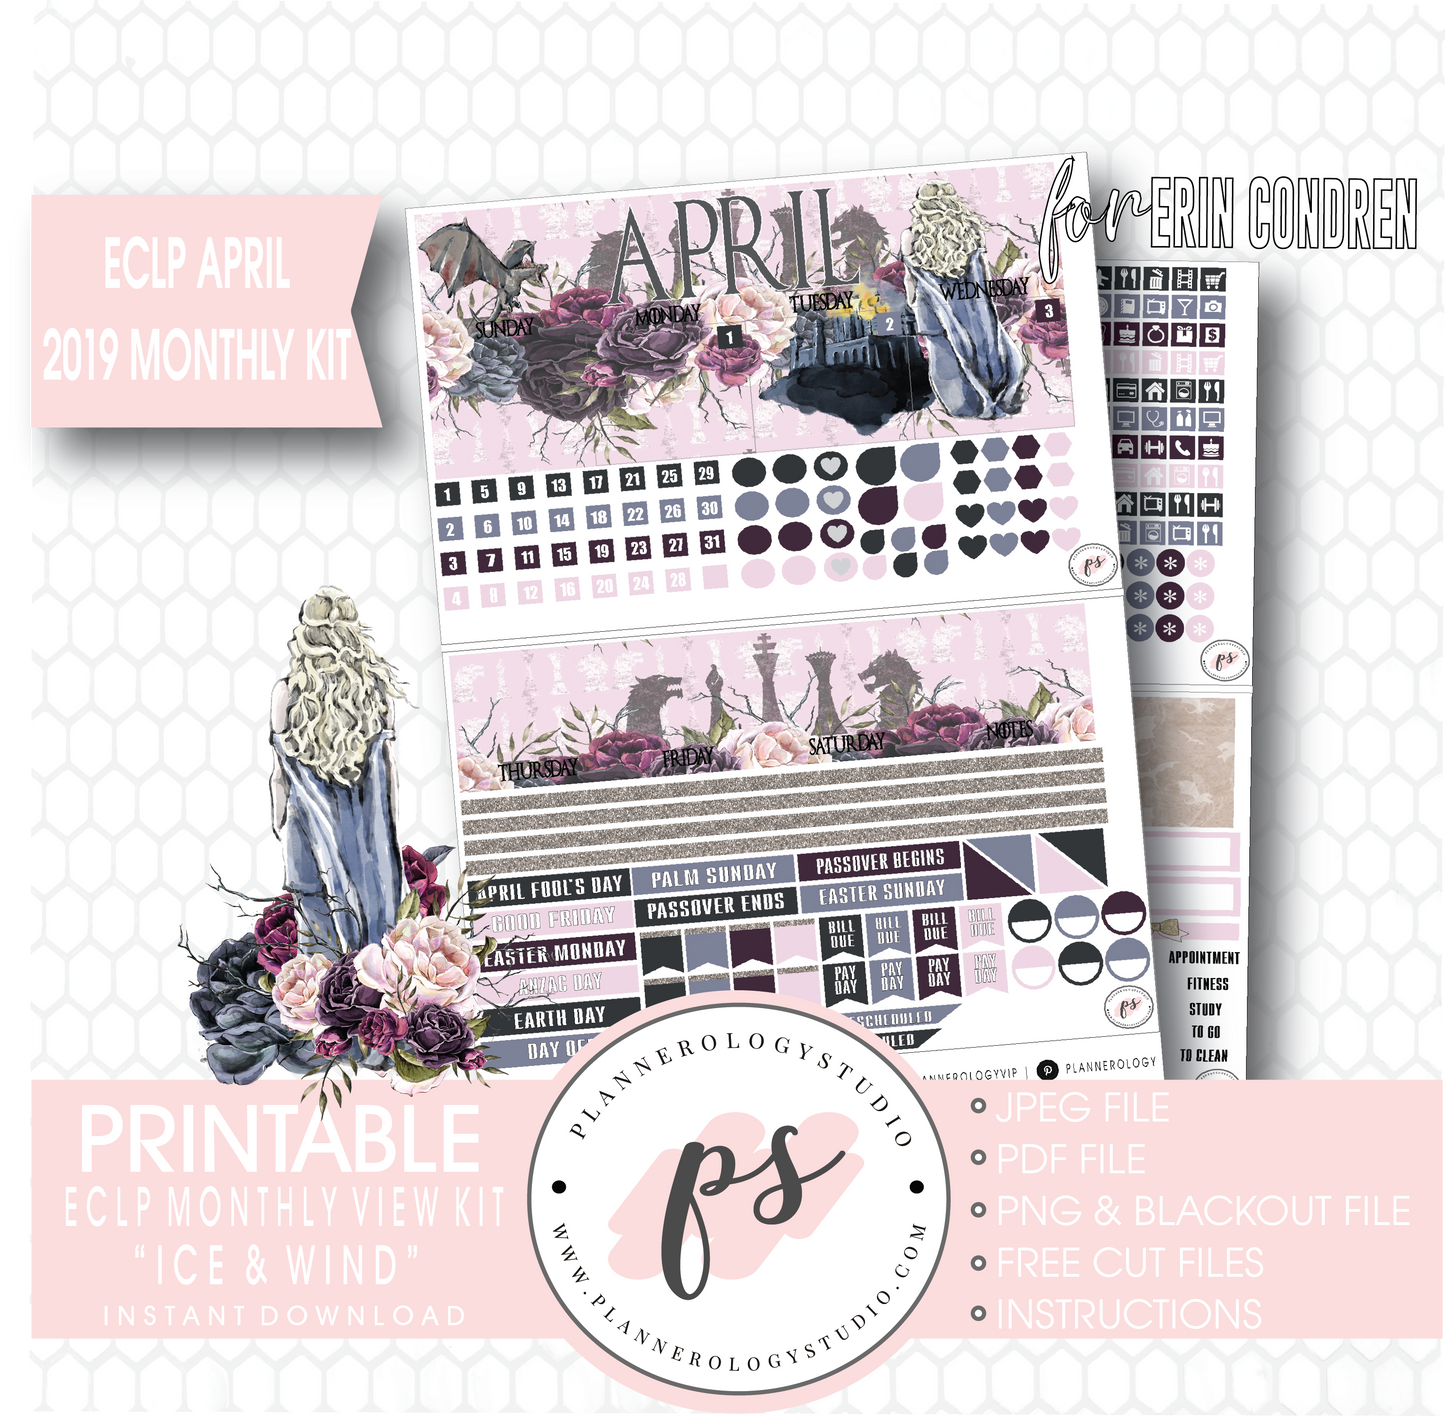 Ice & Wind (Game of Thrones) April 2019 Monthly View Kit Digital Printable Planner Stickers (for use with Erin Condren) - Plannerologystudio